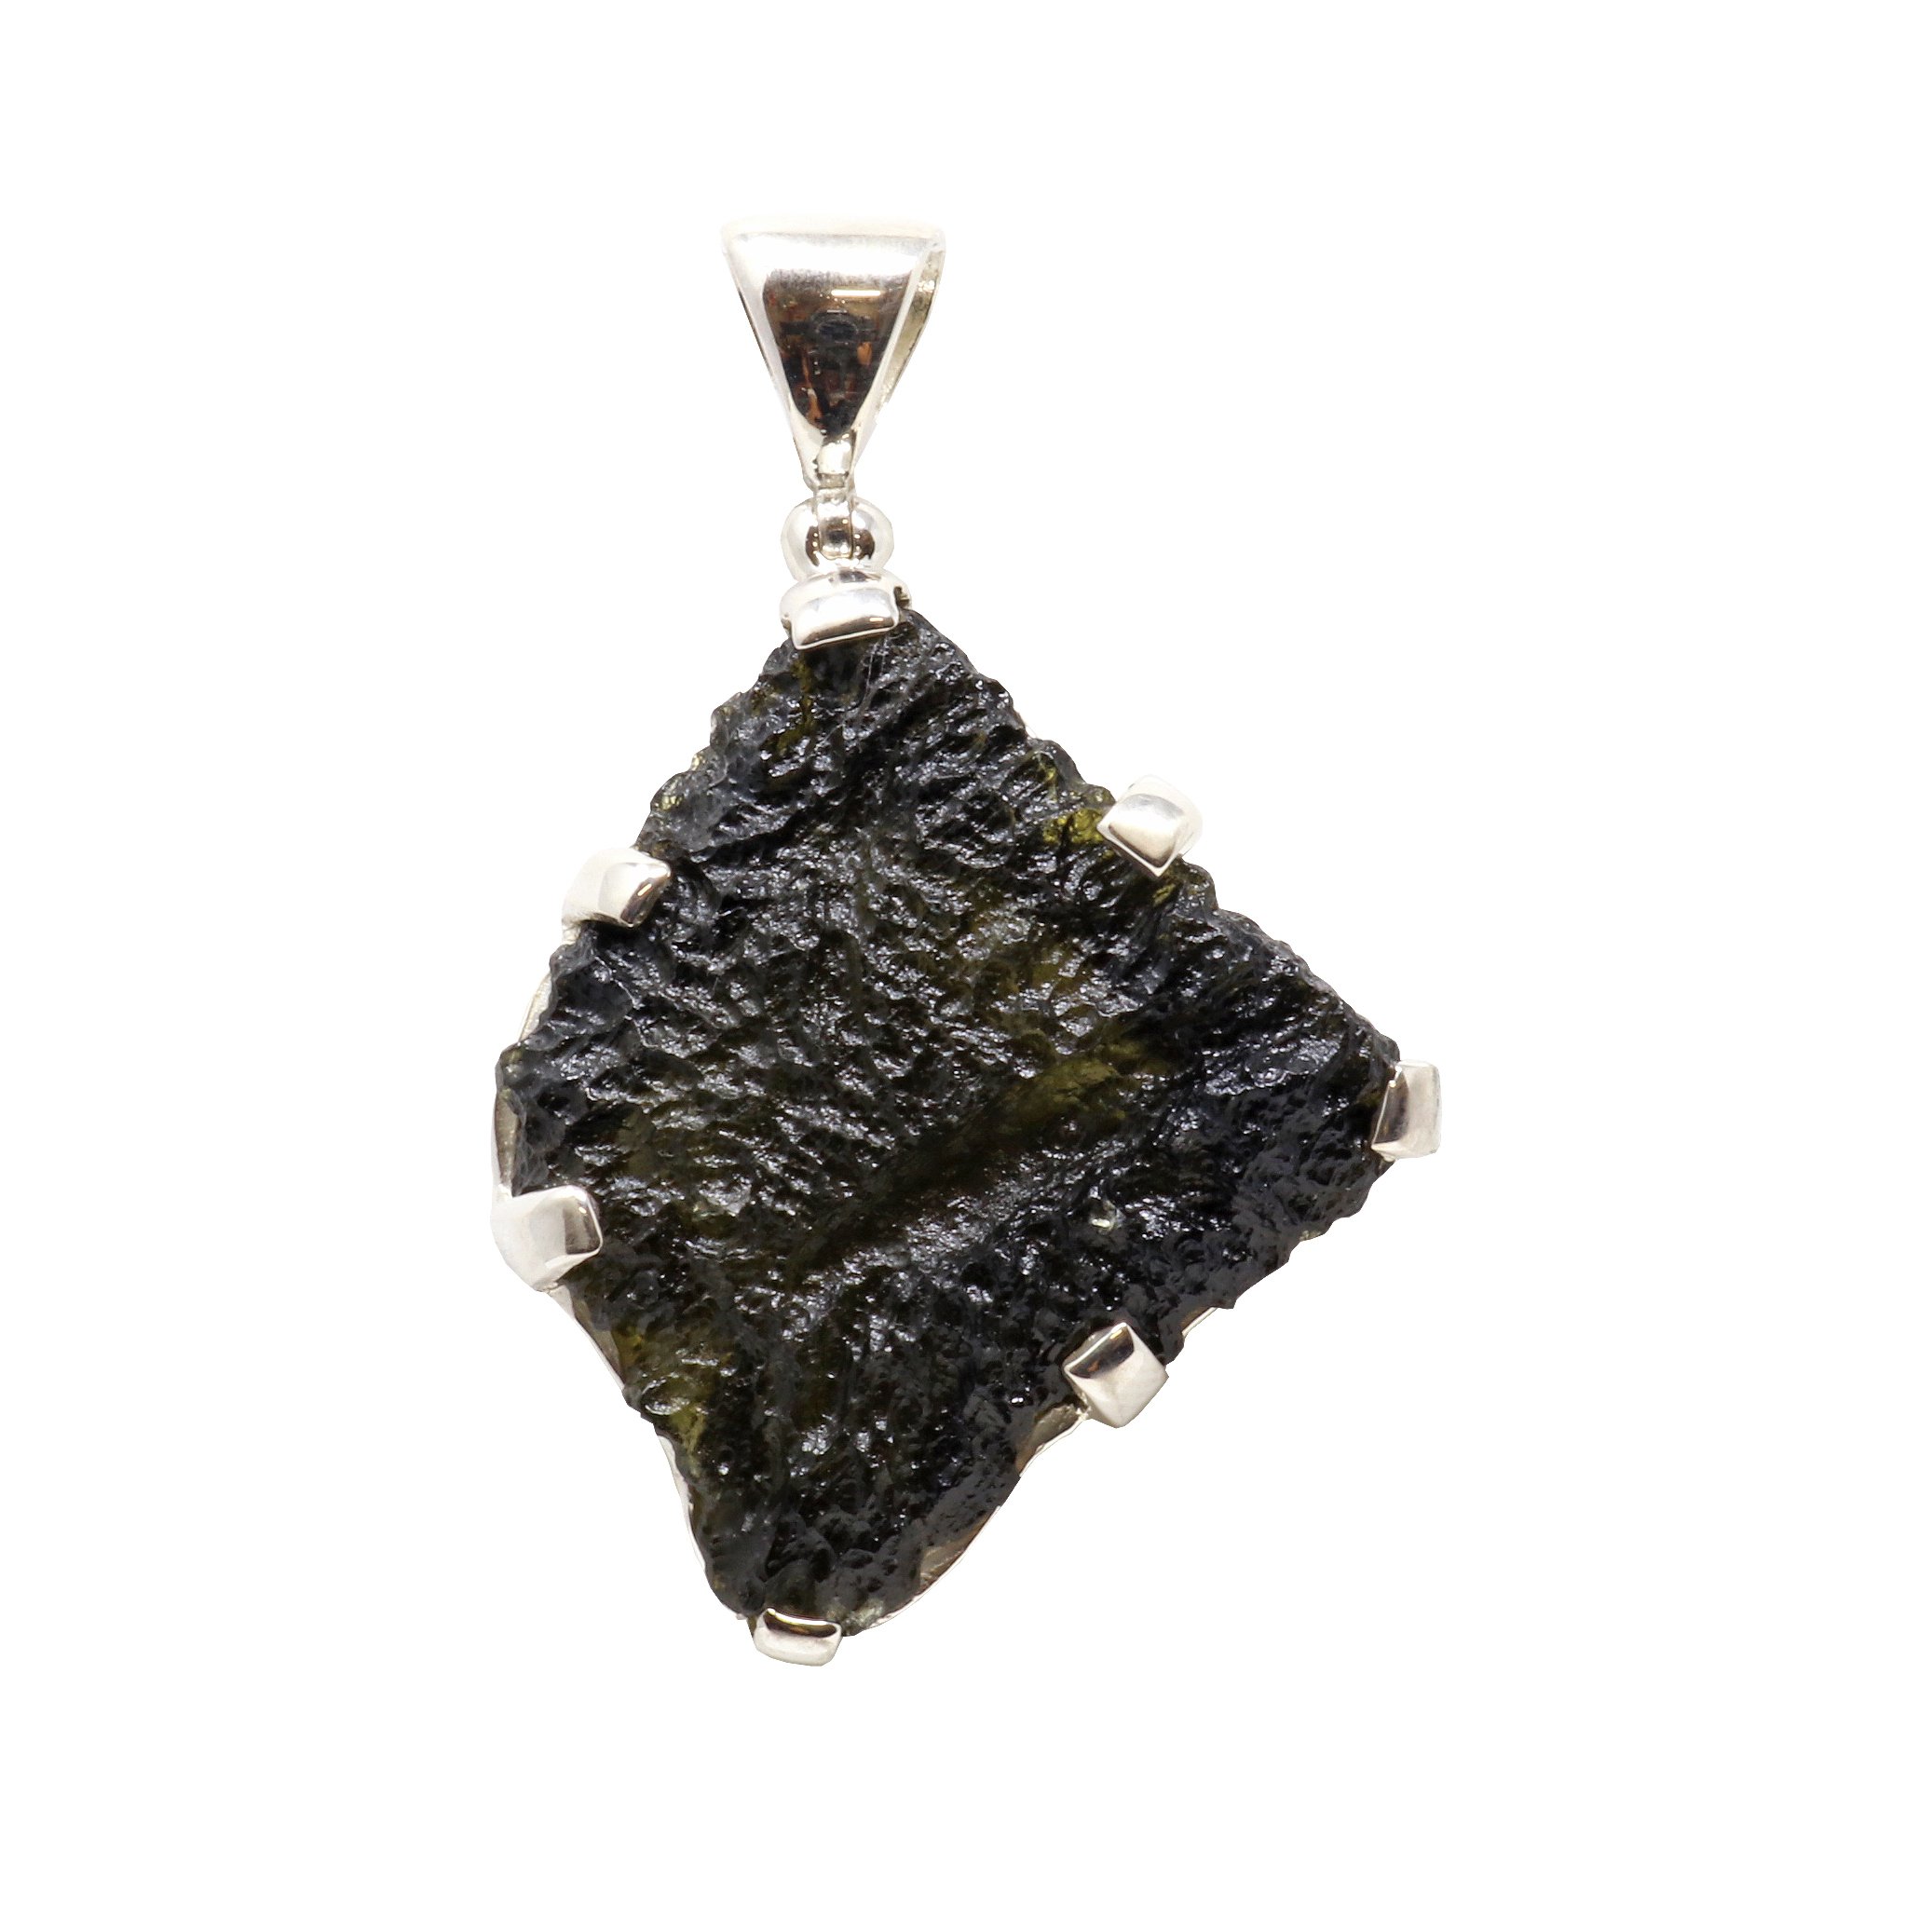 Moldavite Pendant - Freeform With Natural Ruggedness & Divot With Extremely Dark Olive Green Hue & Silver Bezel - Prong Set